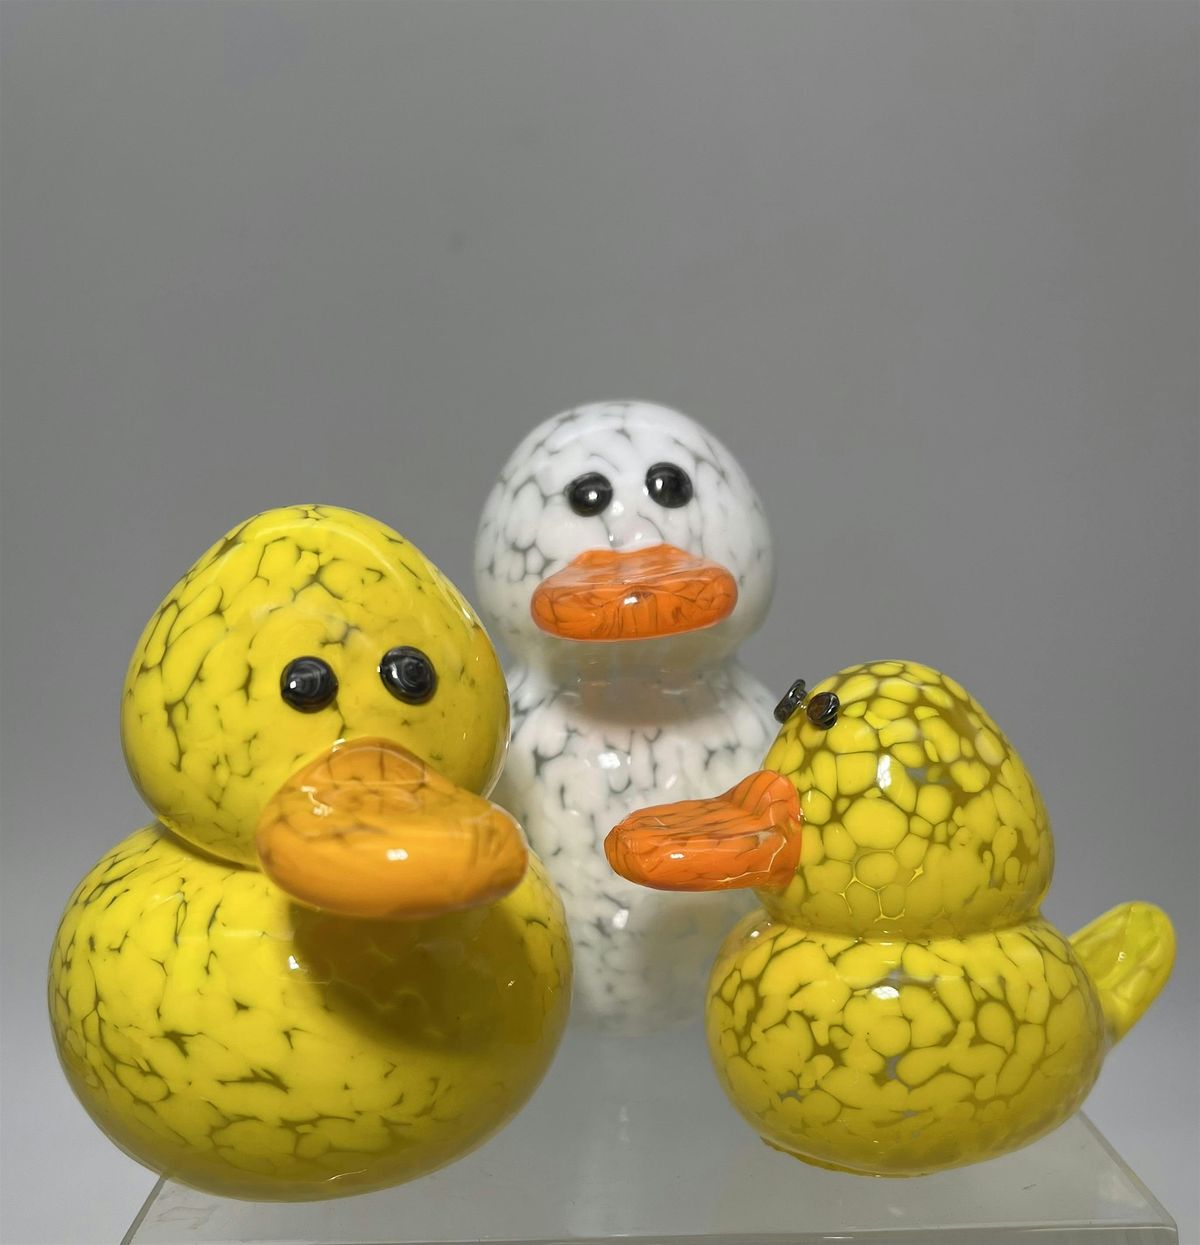 It's Migratory Bird Day...Make a Quacker! You know, a Duck Paperweight!